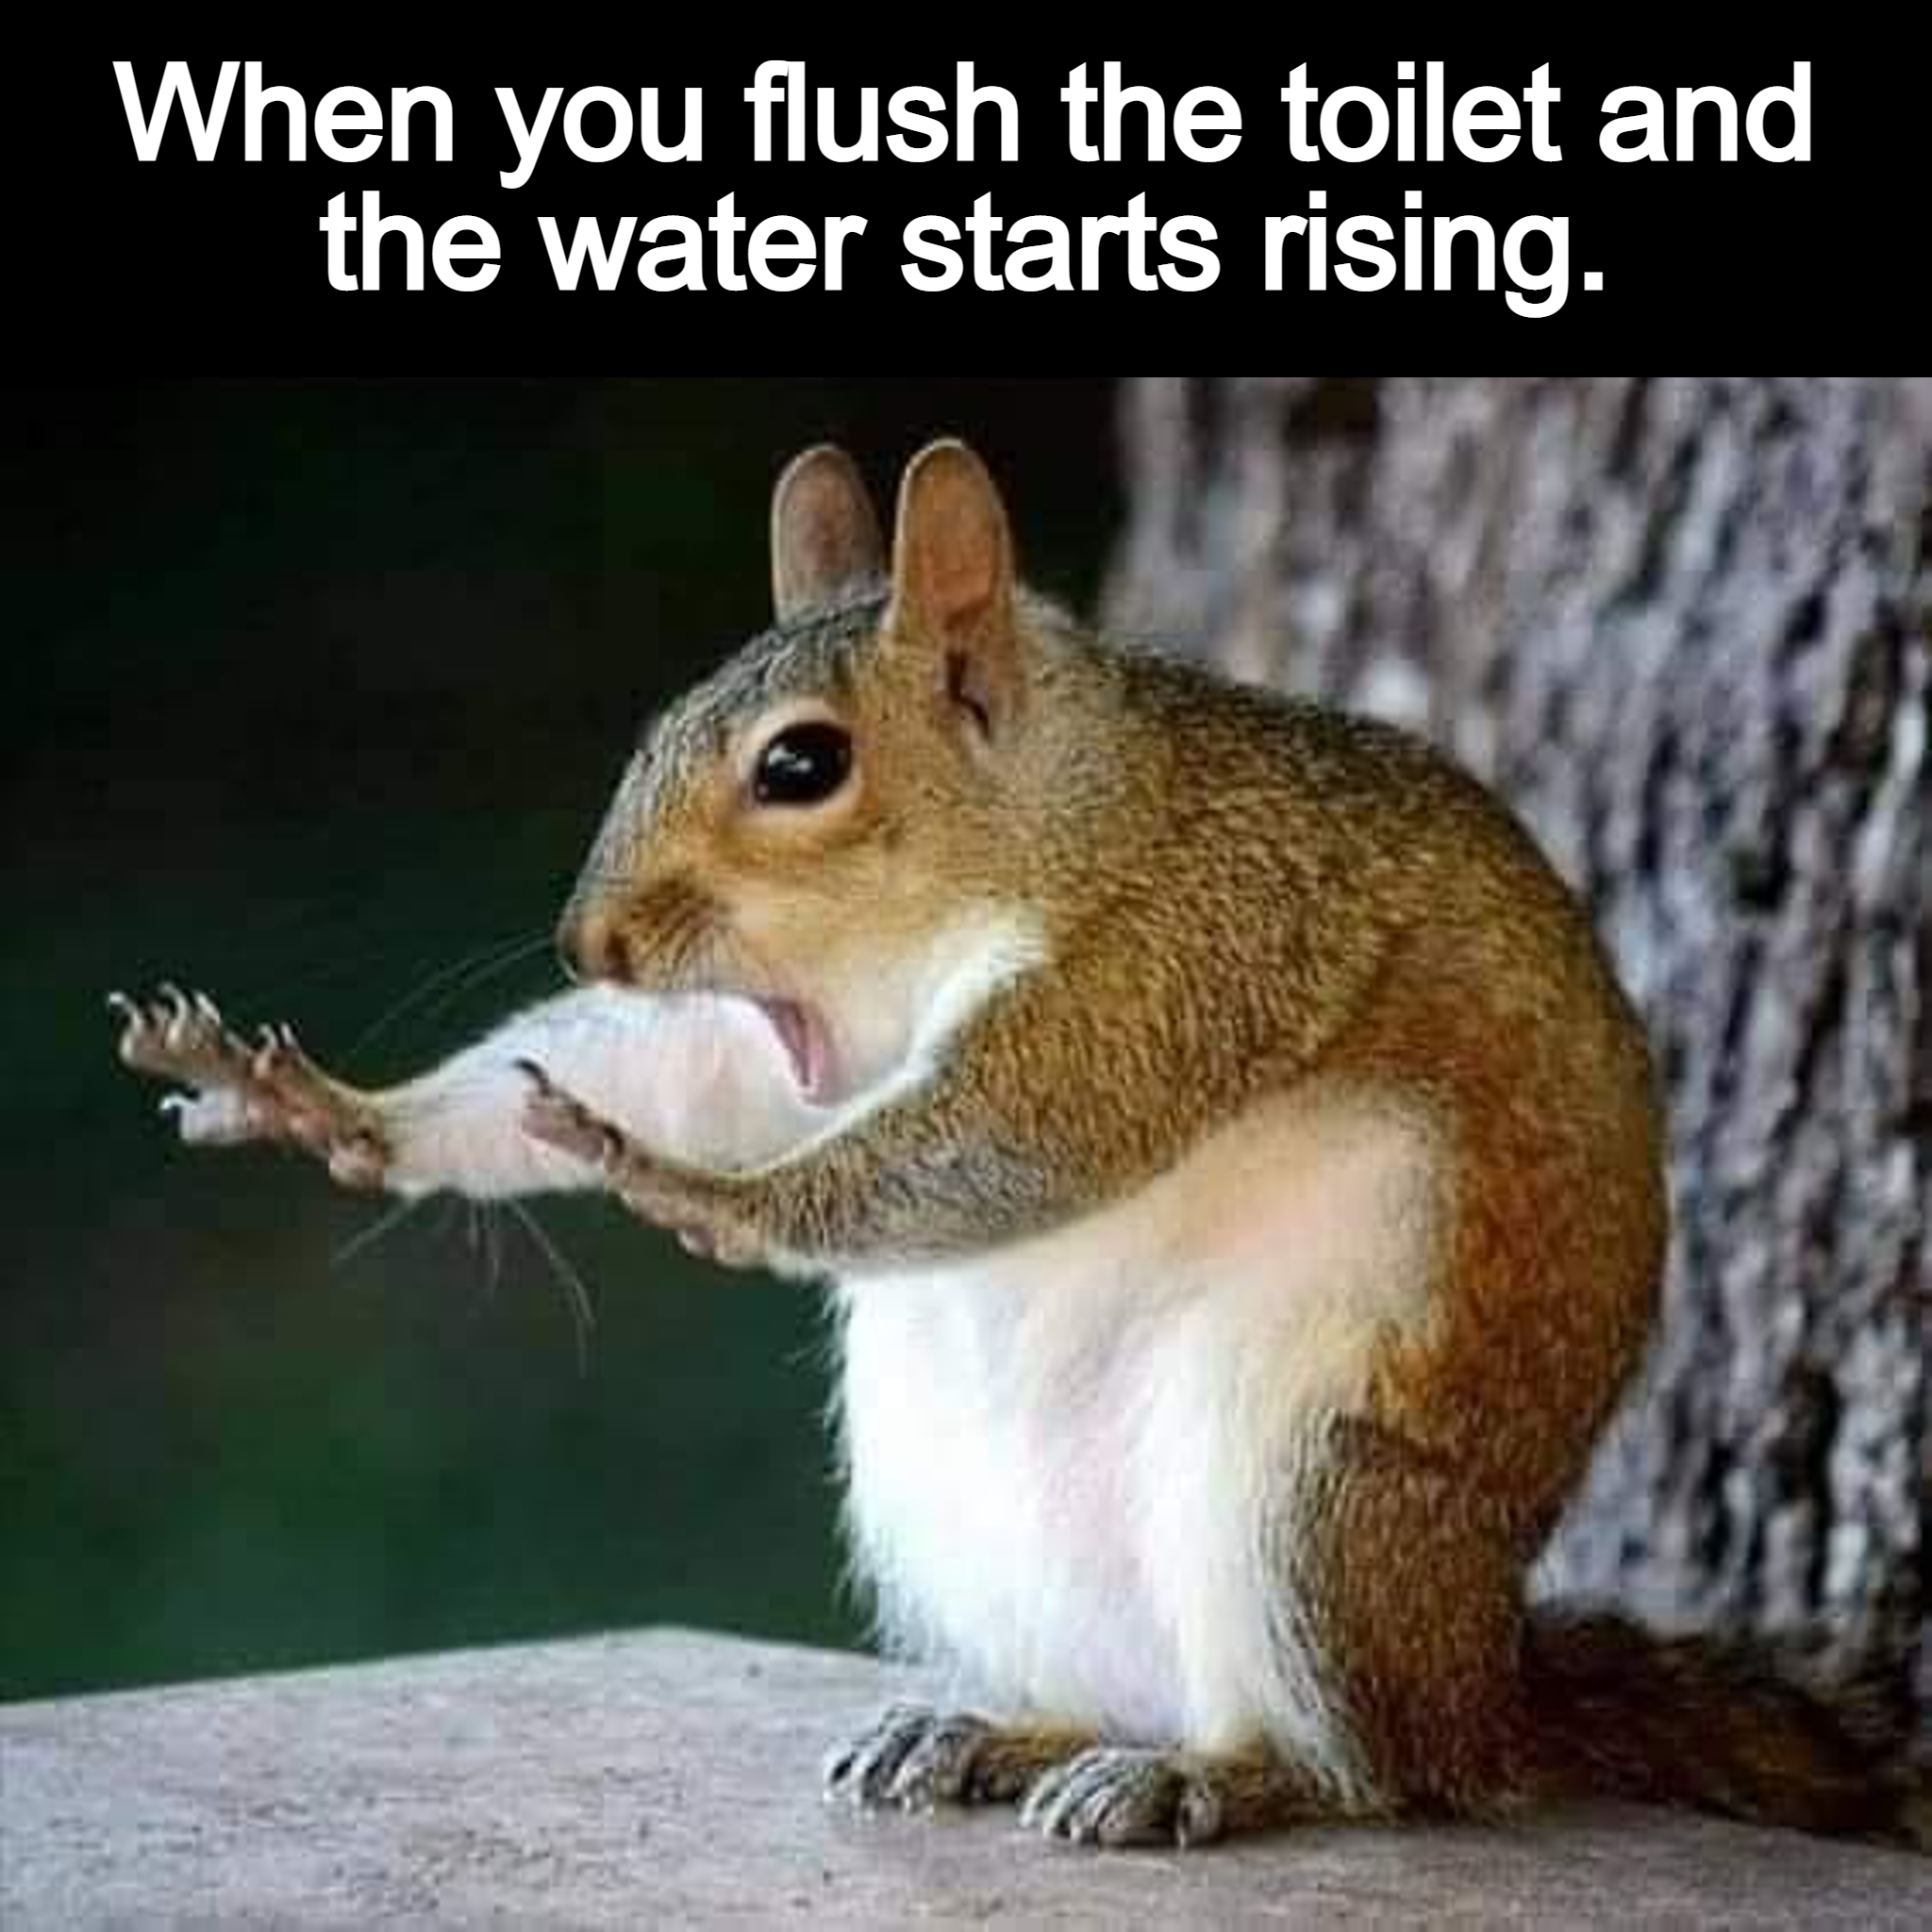 Monday Morning Randomness - flush the toilet the water rises - When you flush the toilet and the water starts rising.